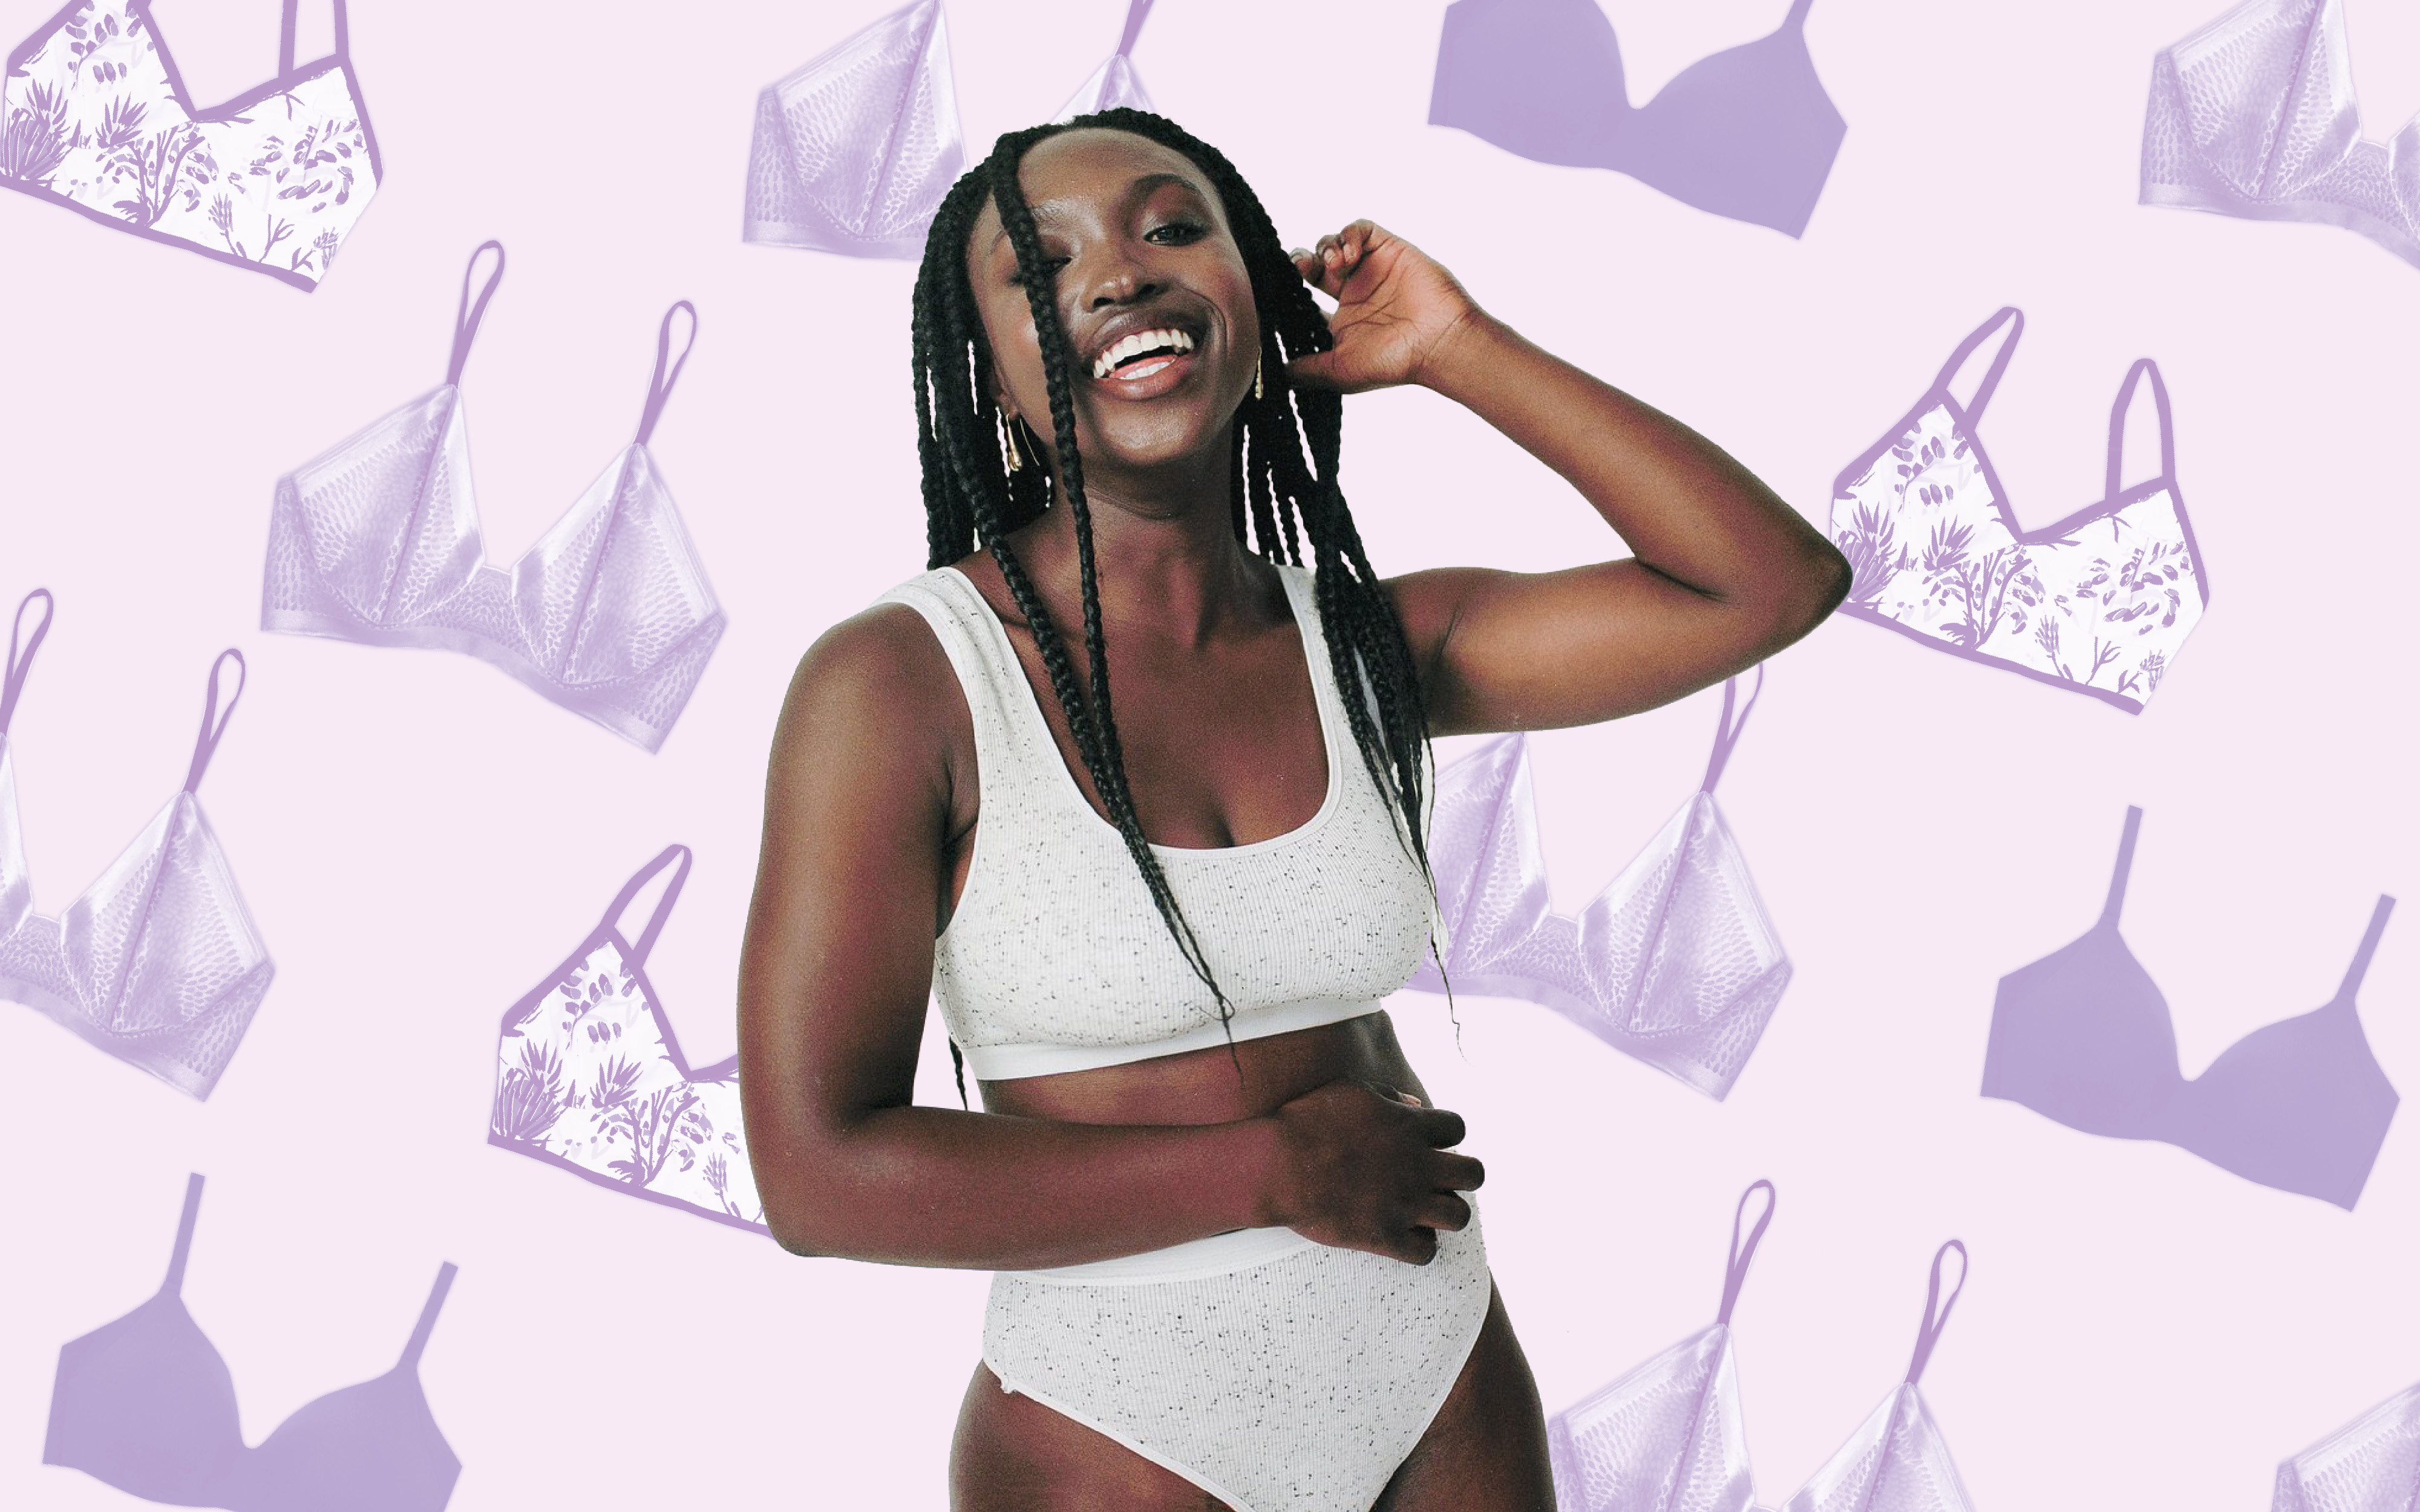 Comfortable Bras You'll Actually Want to Wear